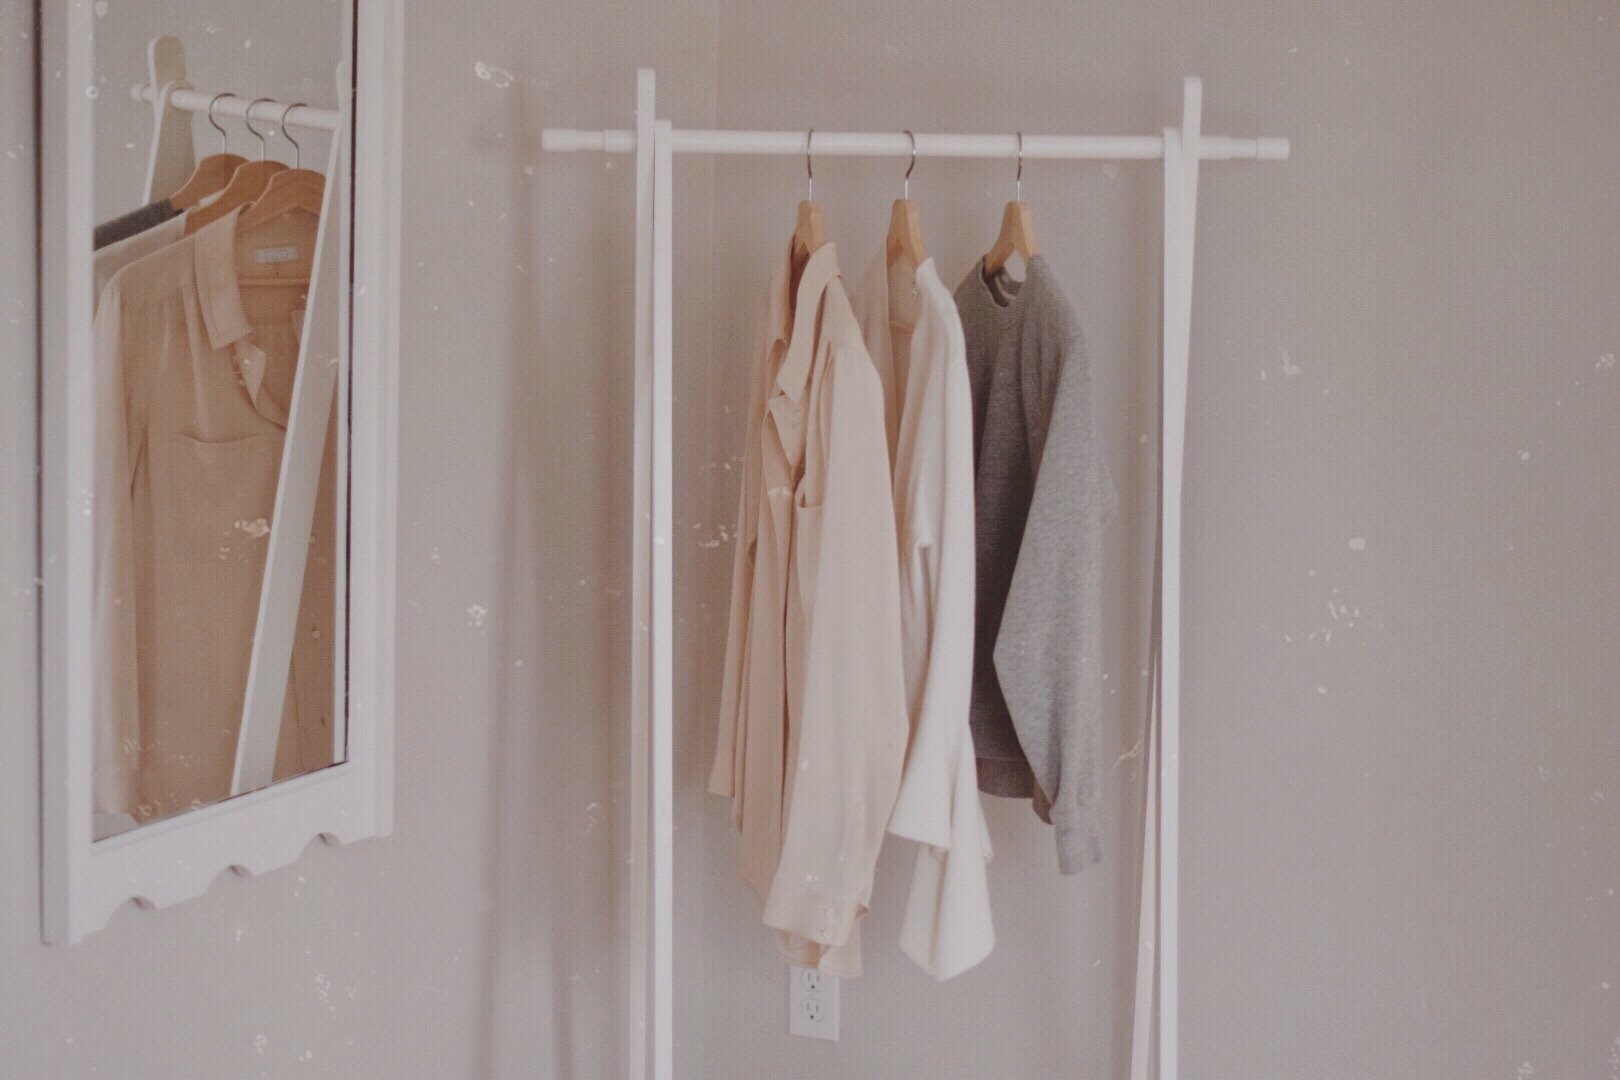 sharing my summer capsule wardrobe with pieces from ethical and sustainable fashion brands